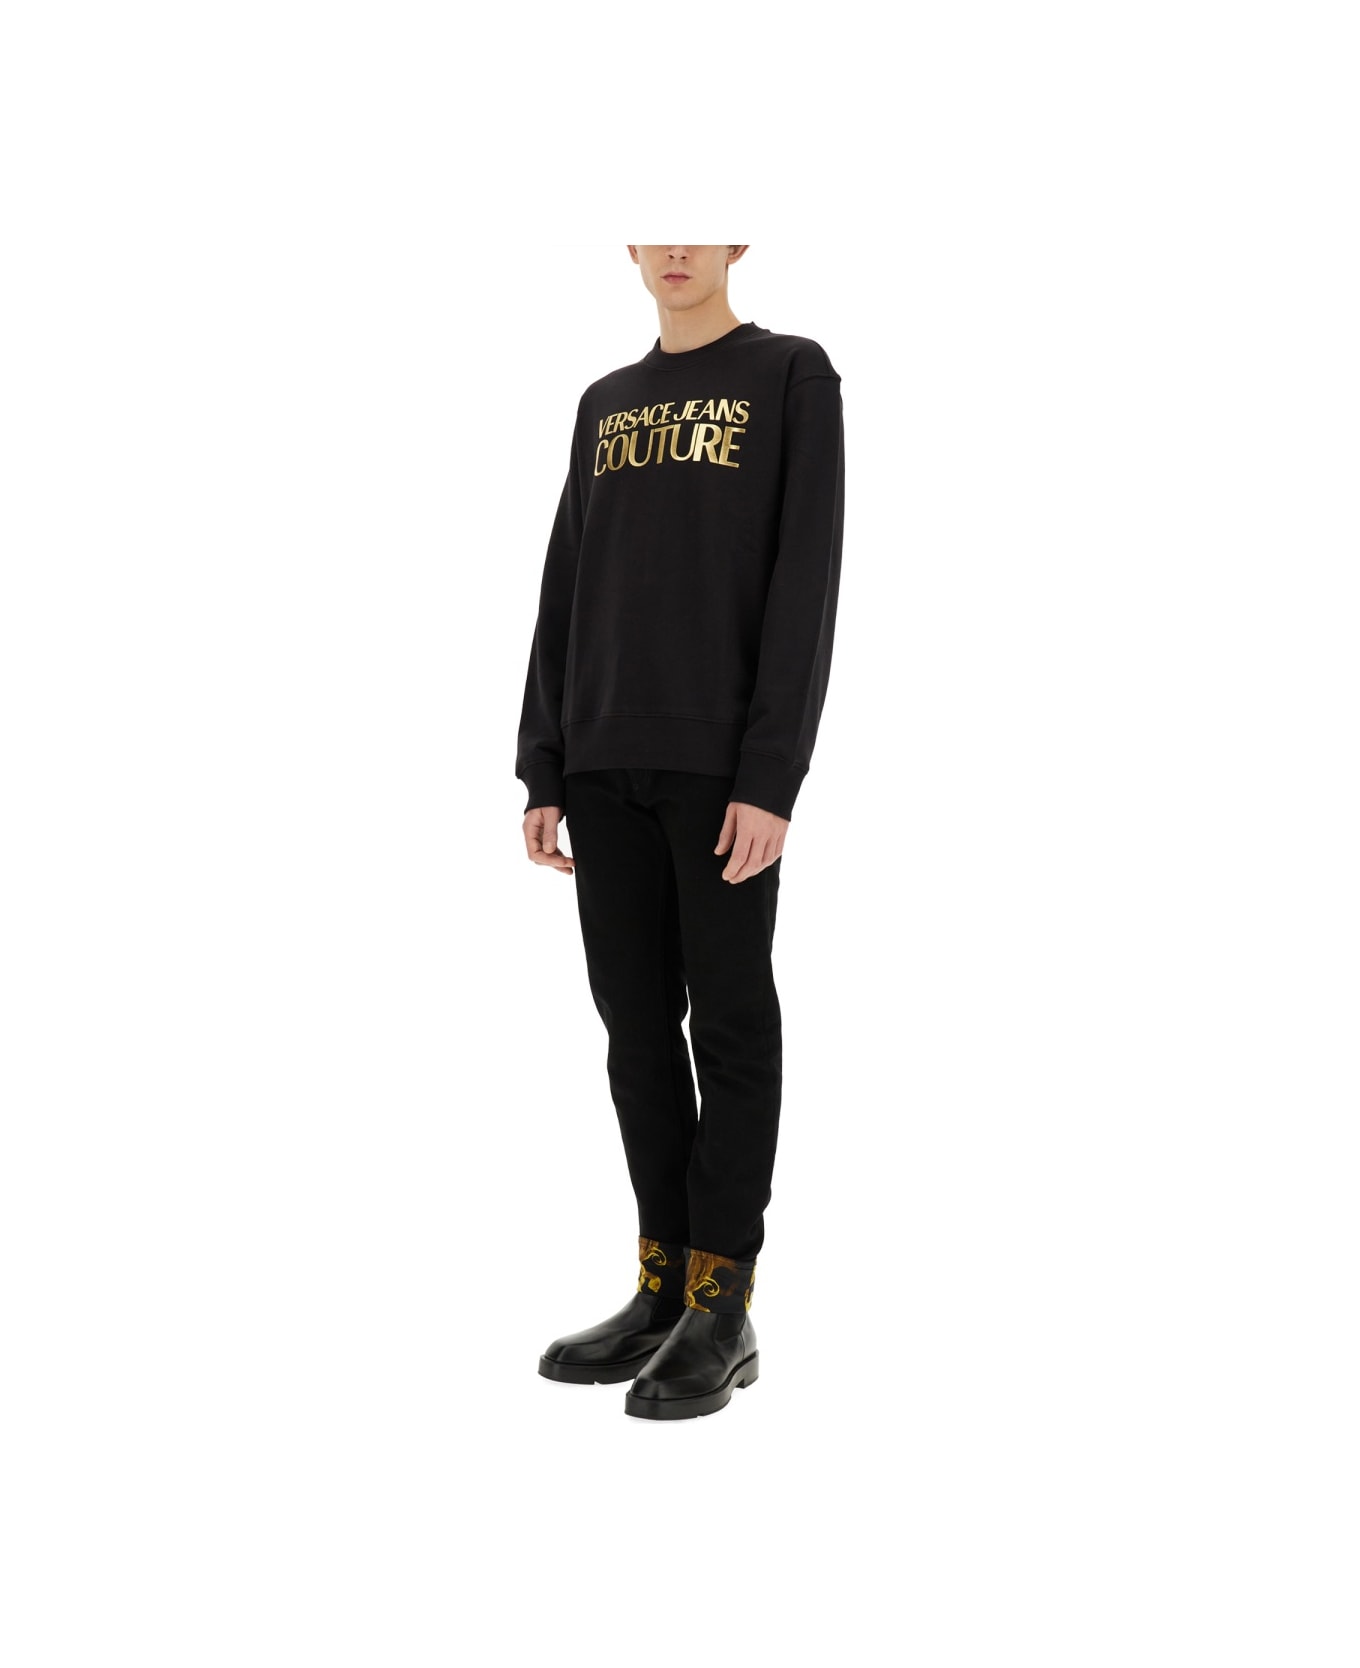 Versace Jeans Couture Sweatshirt With Logo - BLACK フリース